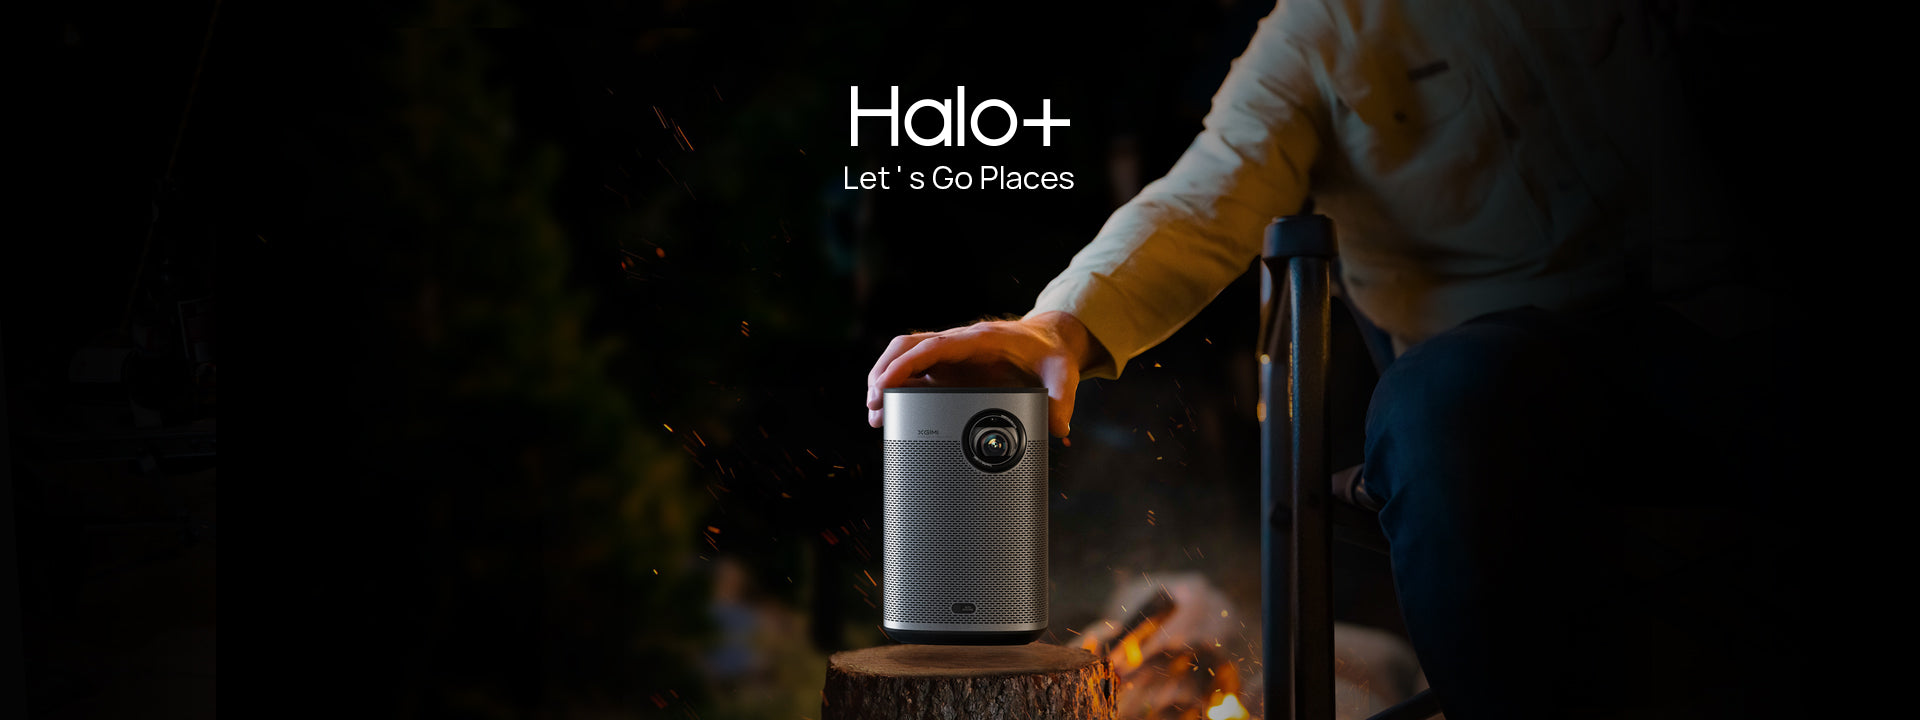 Halo+ now offers smarter setup functionality using XGIMI’s own suite of Ai-powered image correction & stabilization technology, a more powerful and brighter LED (900 ANSI lumens), enhanced custom Harman Kardon speakers and a longer battery life.